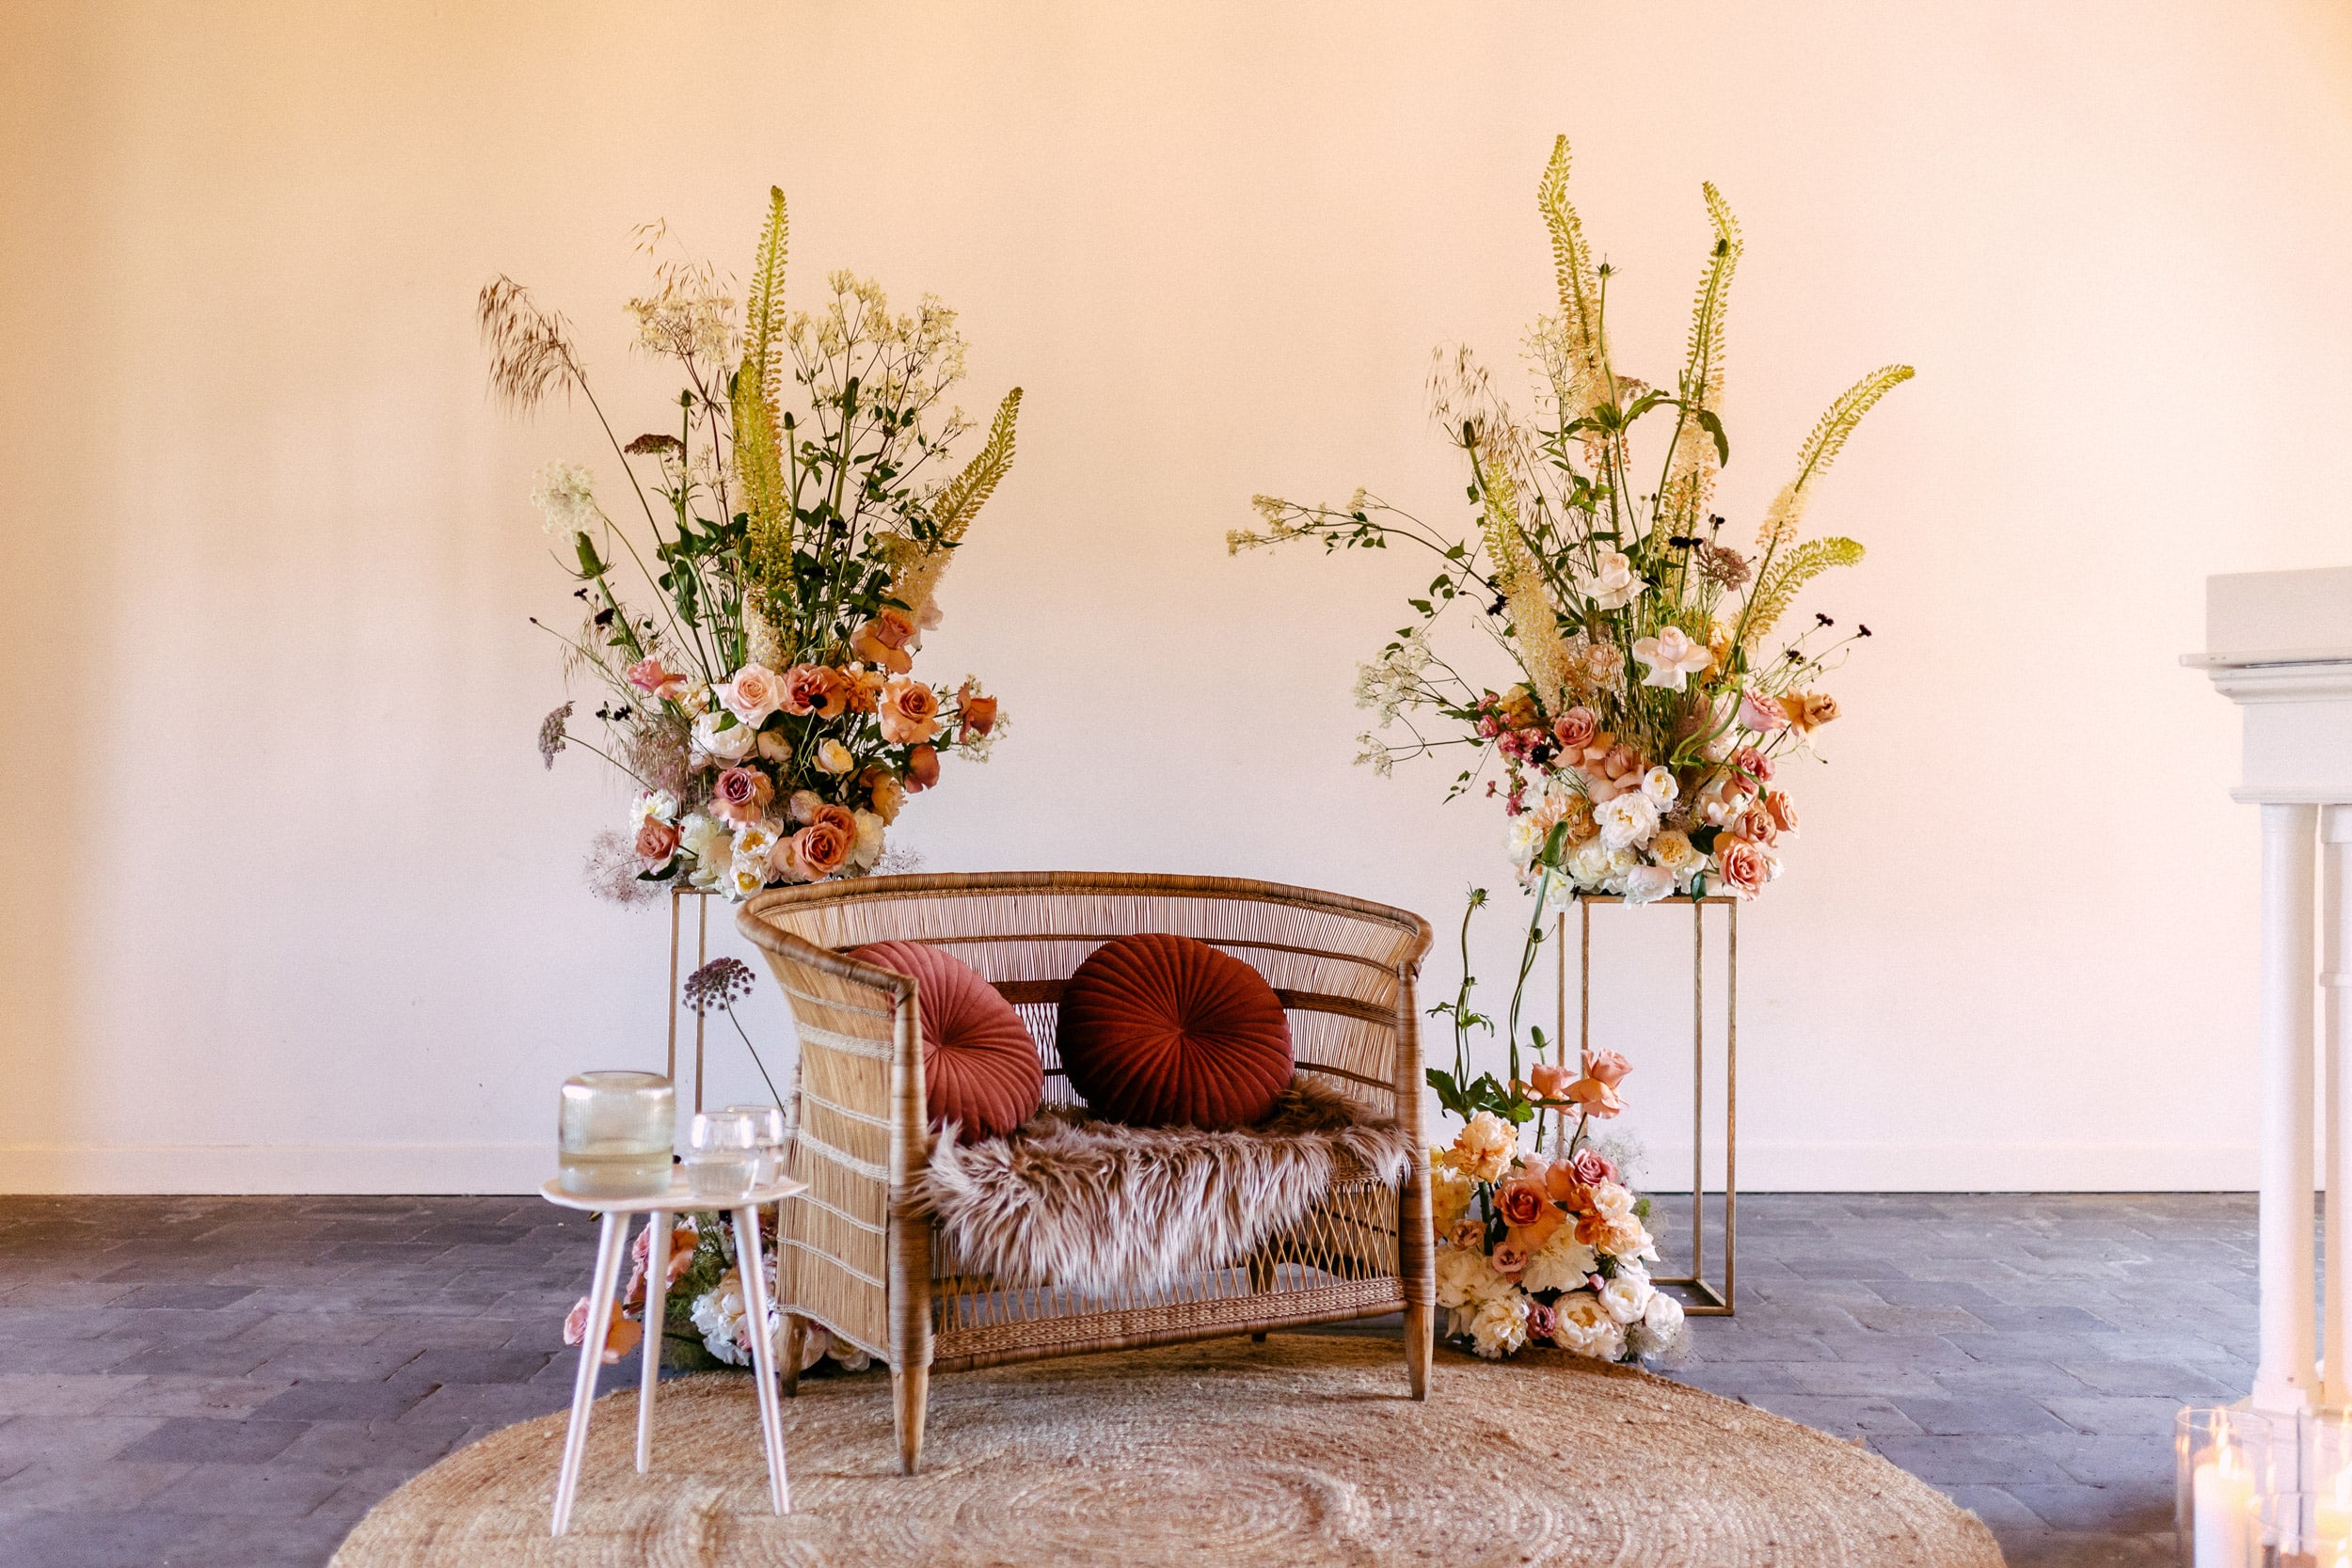 A wicker chair with flowers in the middle of a room, perfect for a wedding theme.